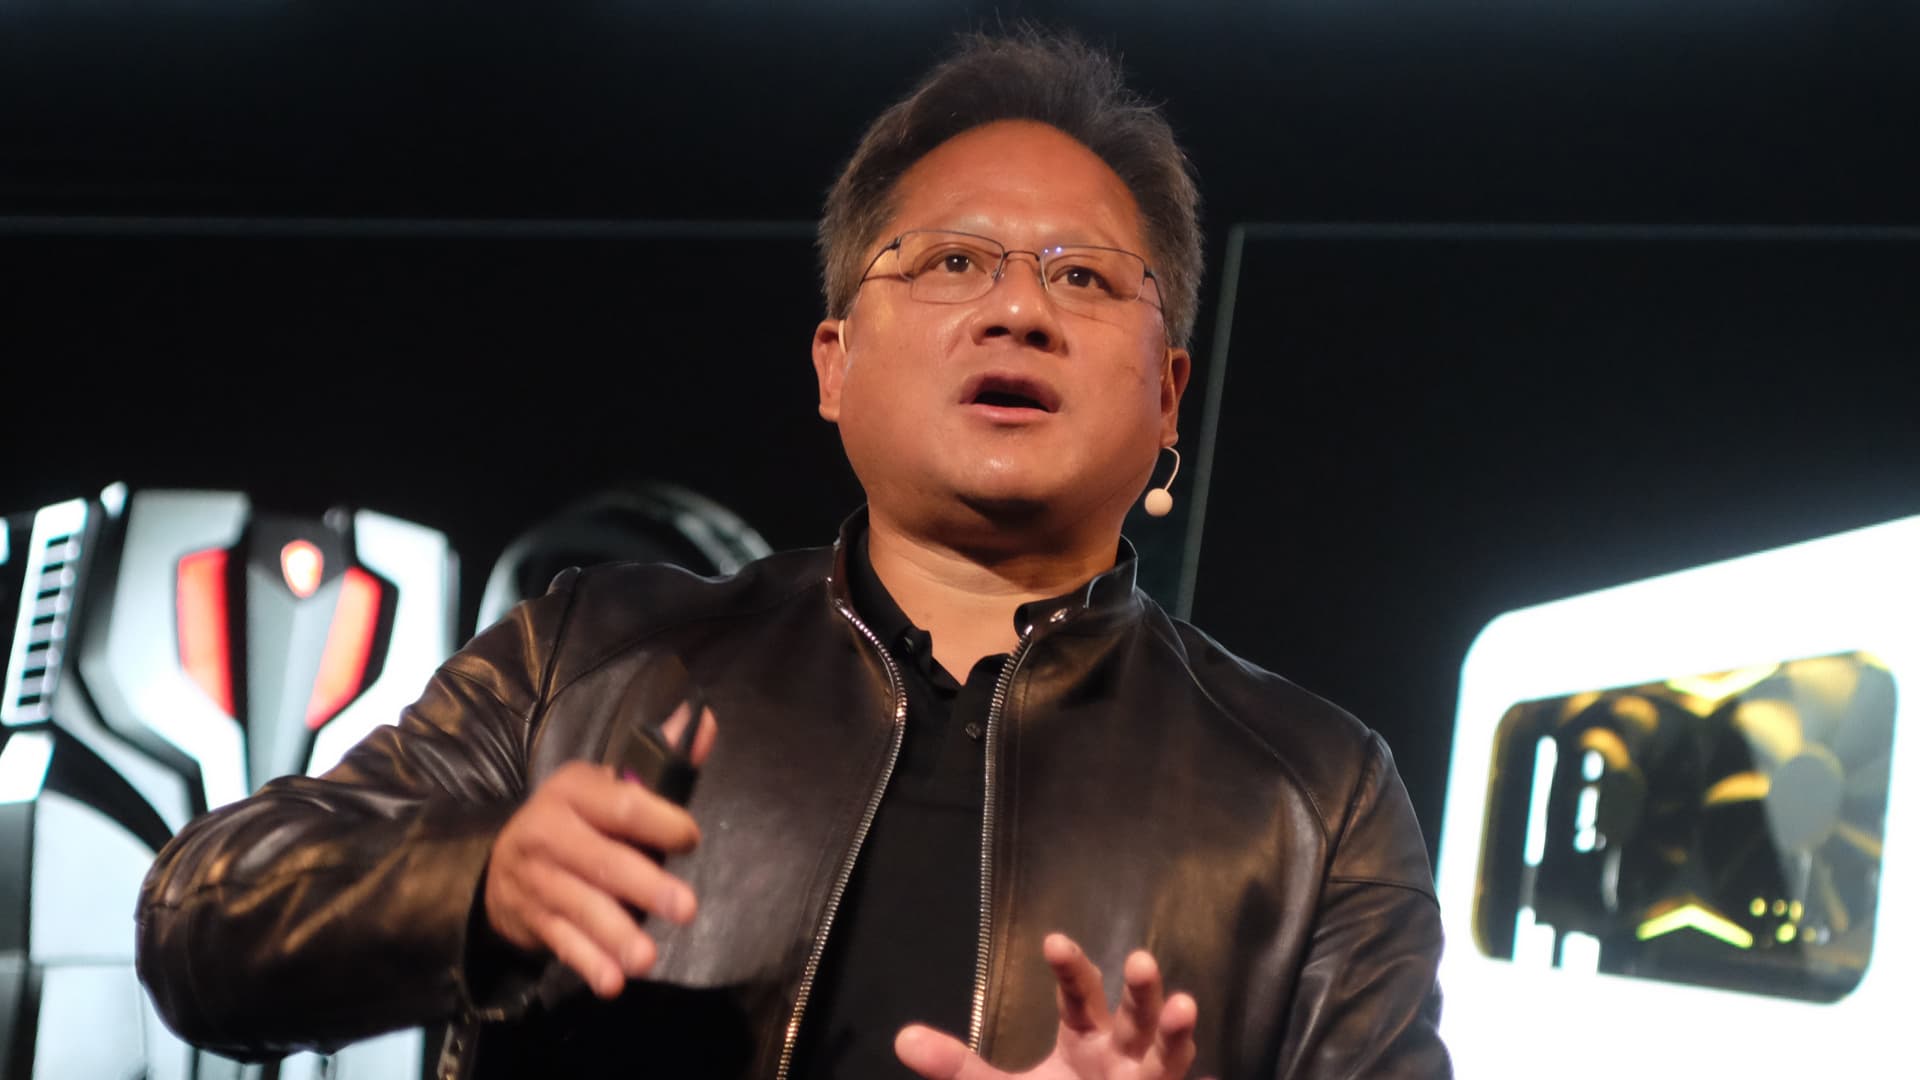 Nvidia's chips fuel A.I. — Here's why the U.S. worries about China's access